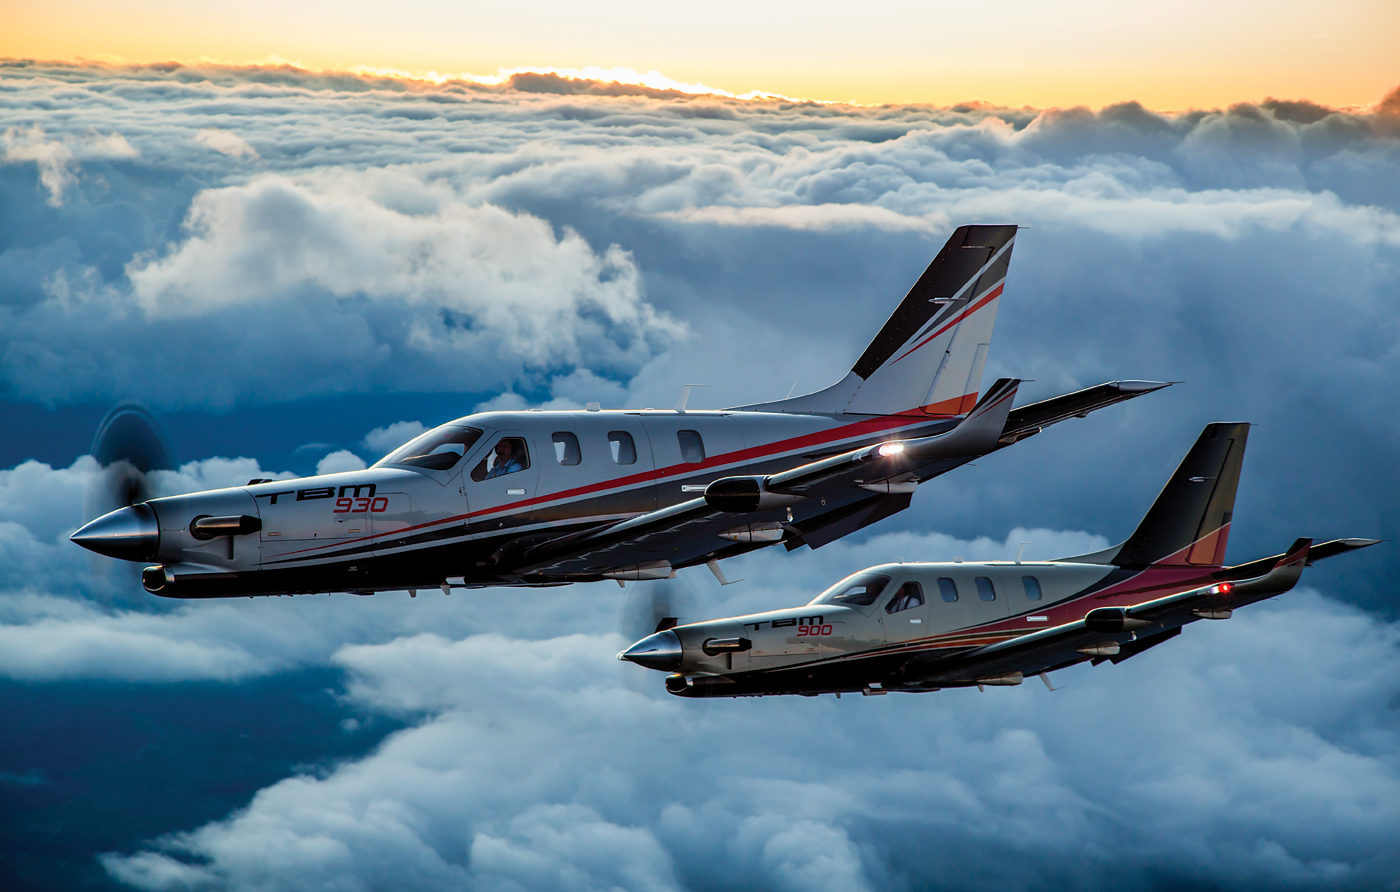 In 2016, Daher announced a new model of its TBM single-engine turboprop family, the TBM 930. Both the Garmin G3000-equipped 930 and the G1000-equipped 900 are currently in production. The TBM 930, the latest version of the world’s fastest certified single-engine turboprop, reaches speeds of 330 knots. Eduardo Da Forno Photo